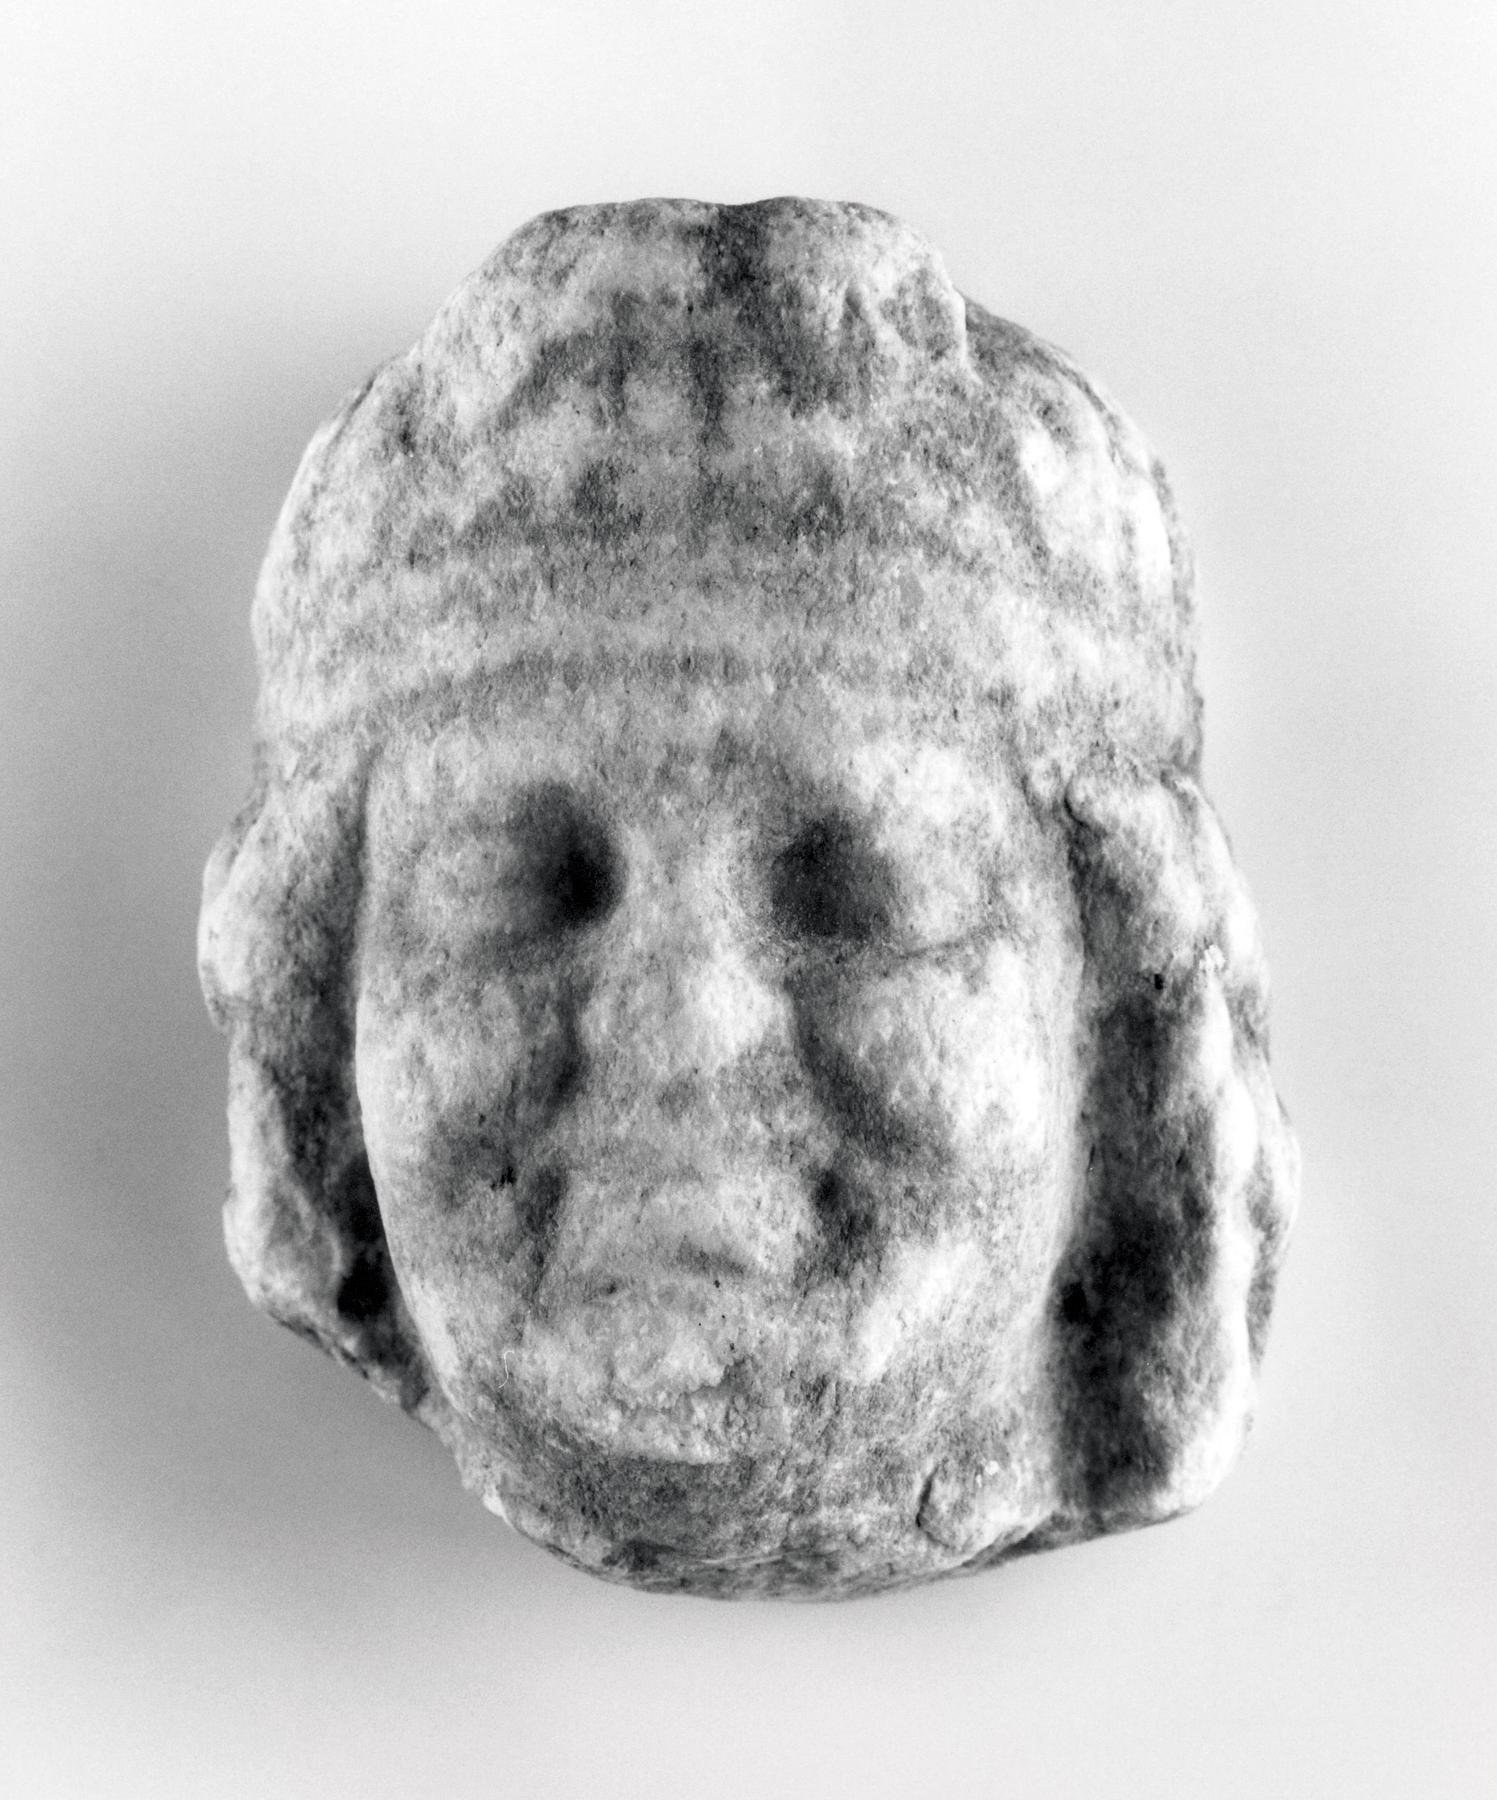 Architectural structure or furniture decoration in the shape of Cupid's head, H1468